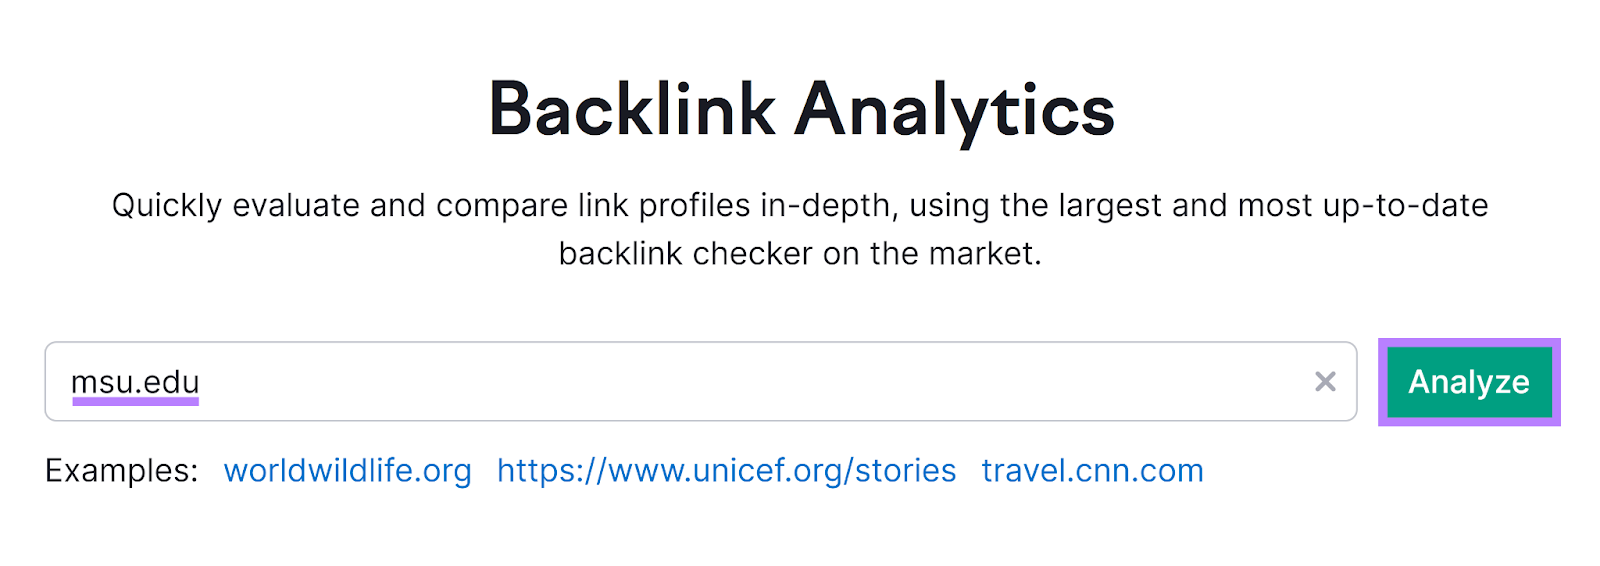 Backlink Analytics tool start with domain entered and Analyze button highlighted.